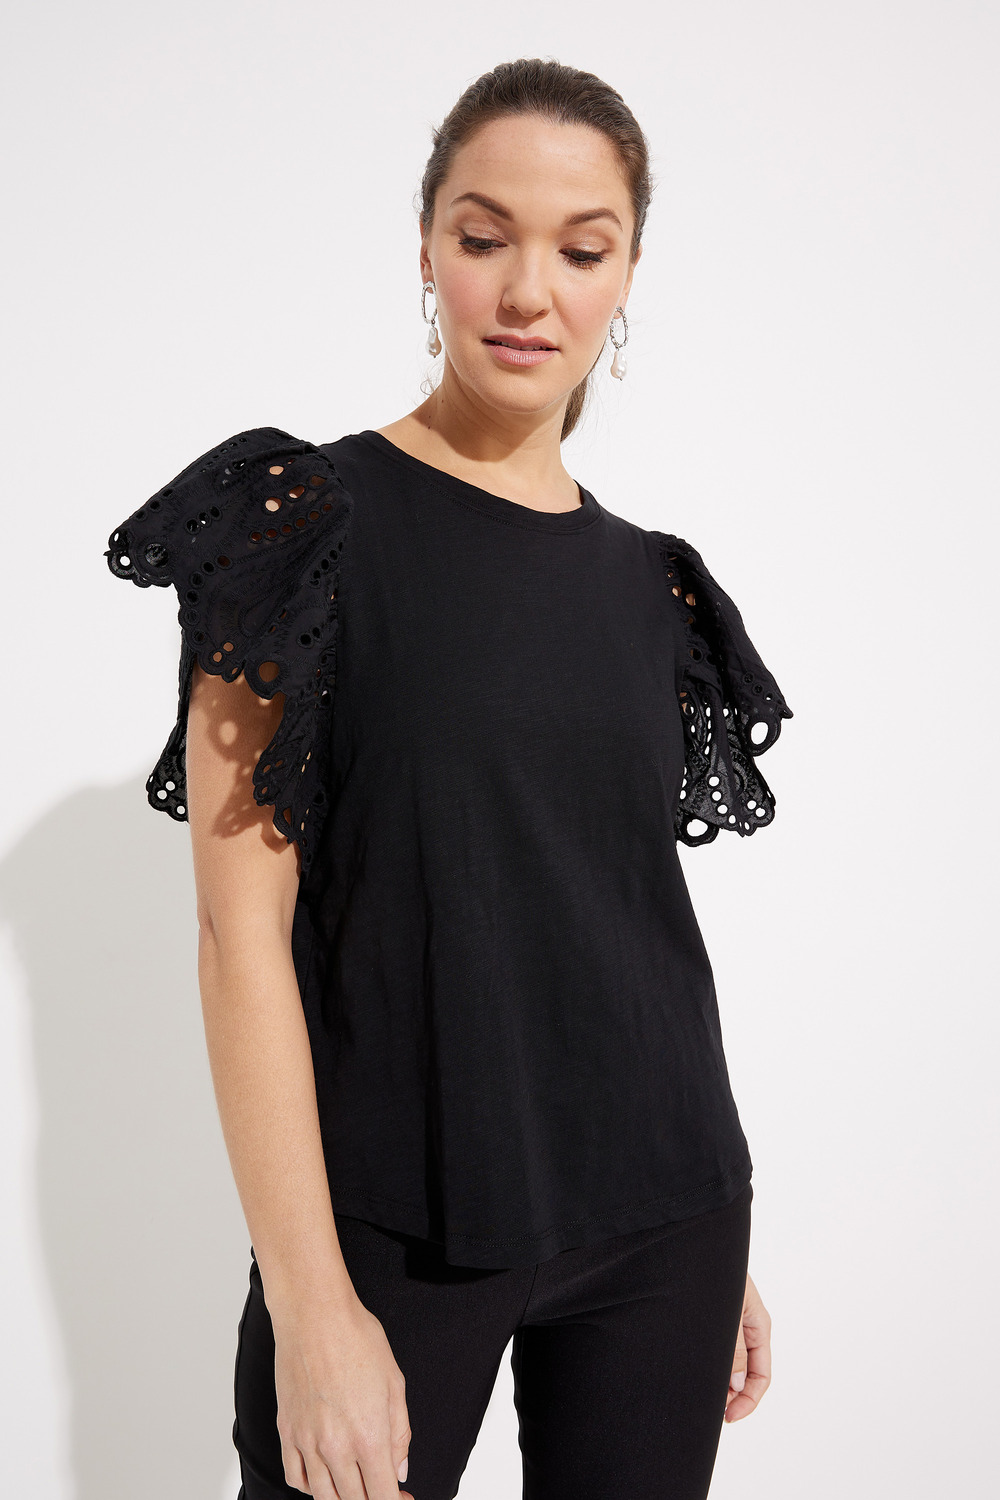 Lace Flutter Sleeve Top Style T7639. Black